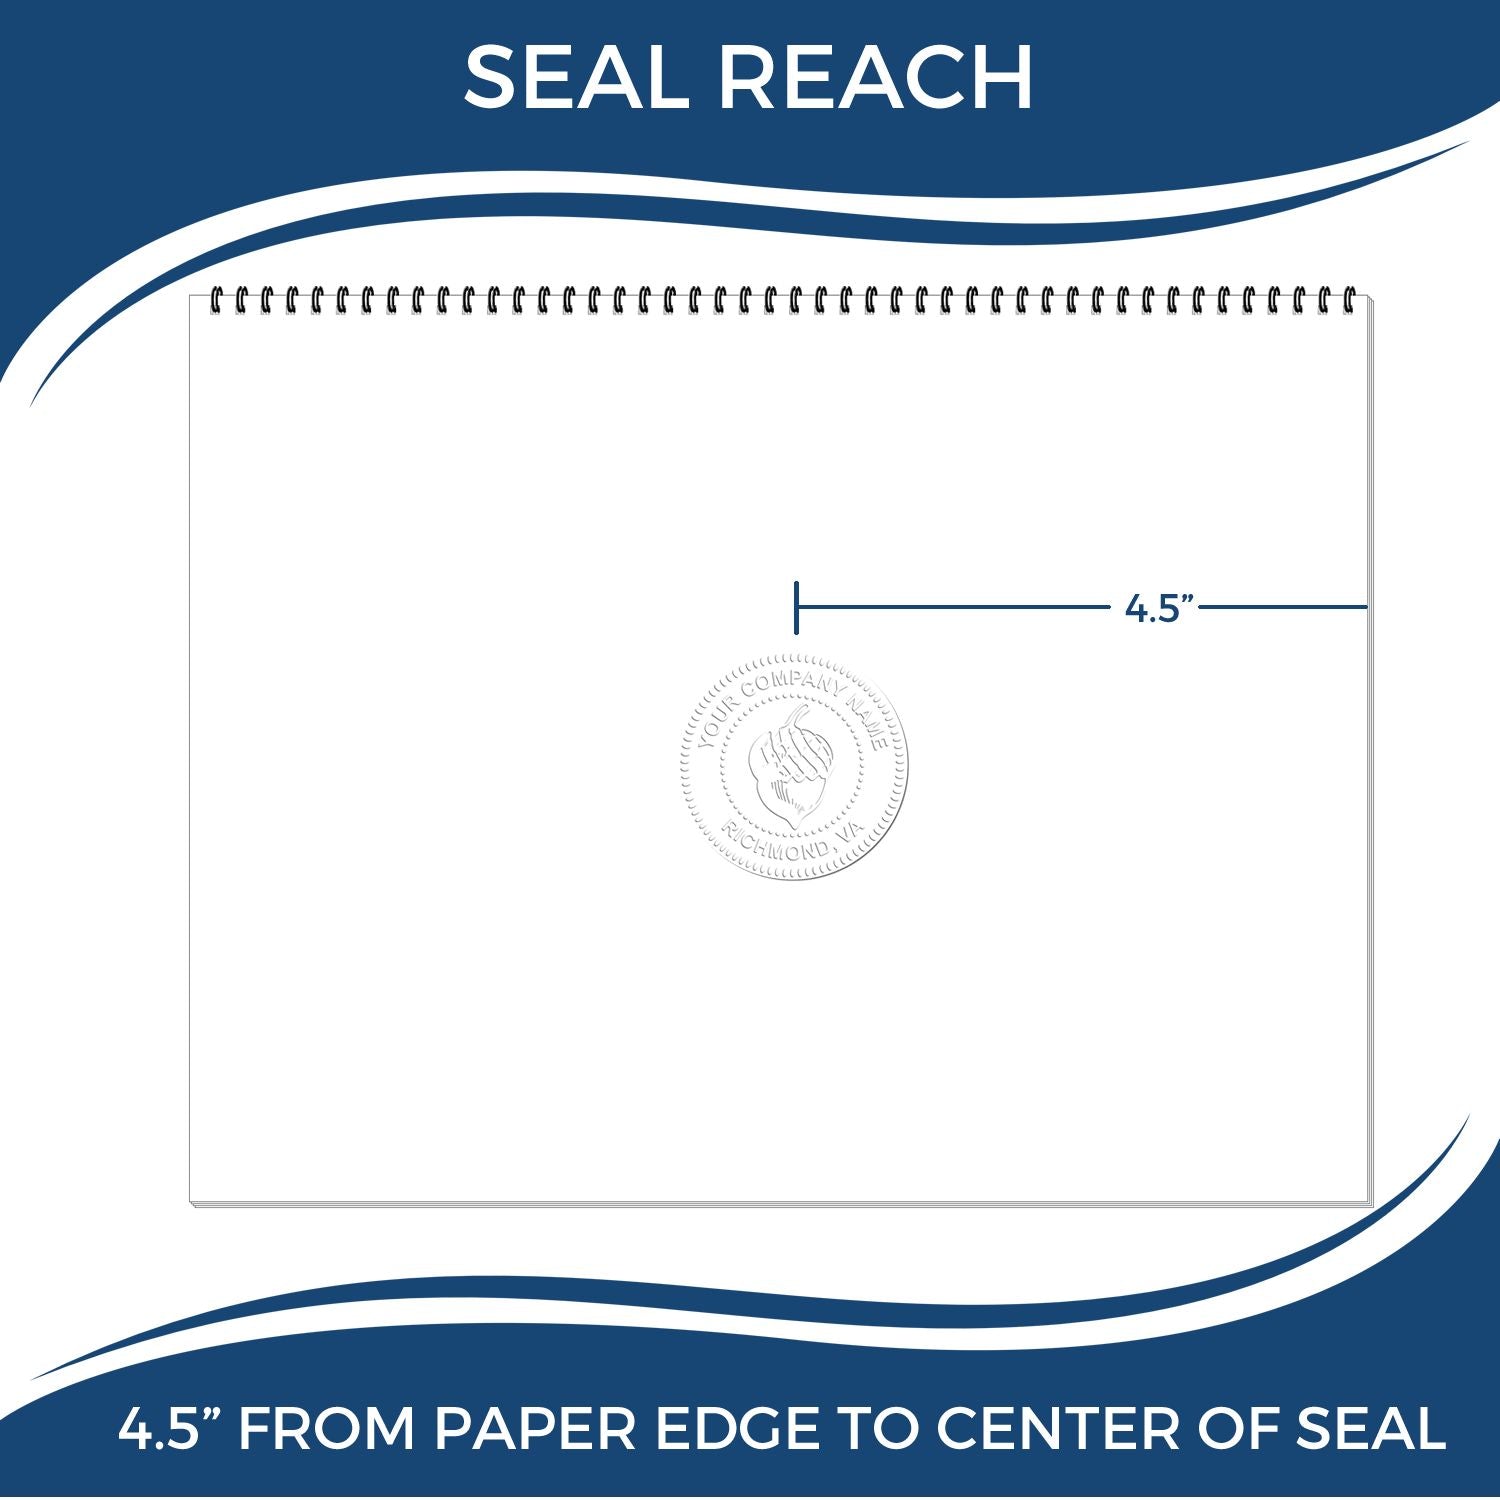 An infographic showing the seal reach which is represented by a ruler and a miniature seal image of the State of Texas Extended Long Reach Geologist Seal